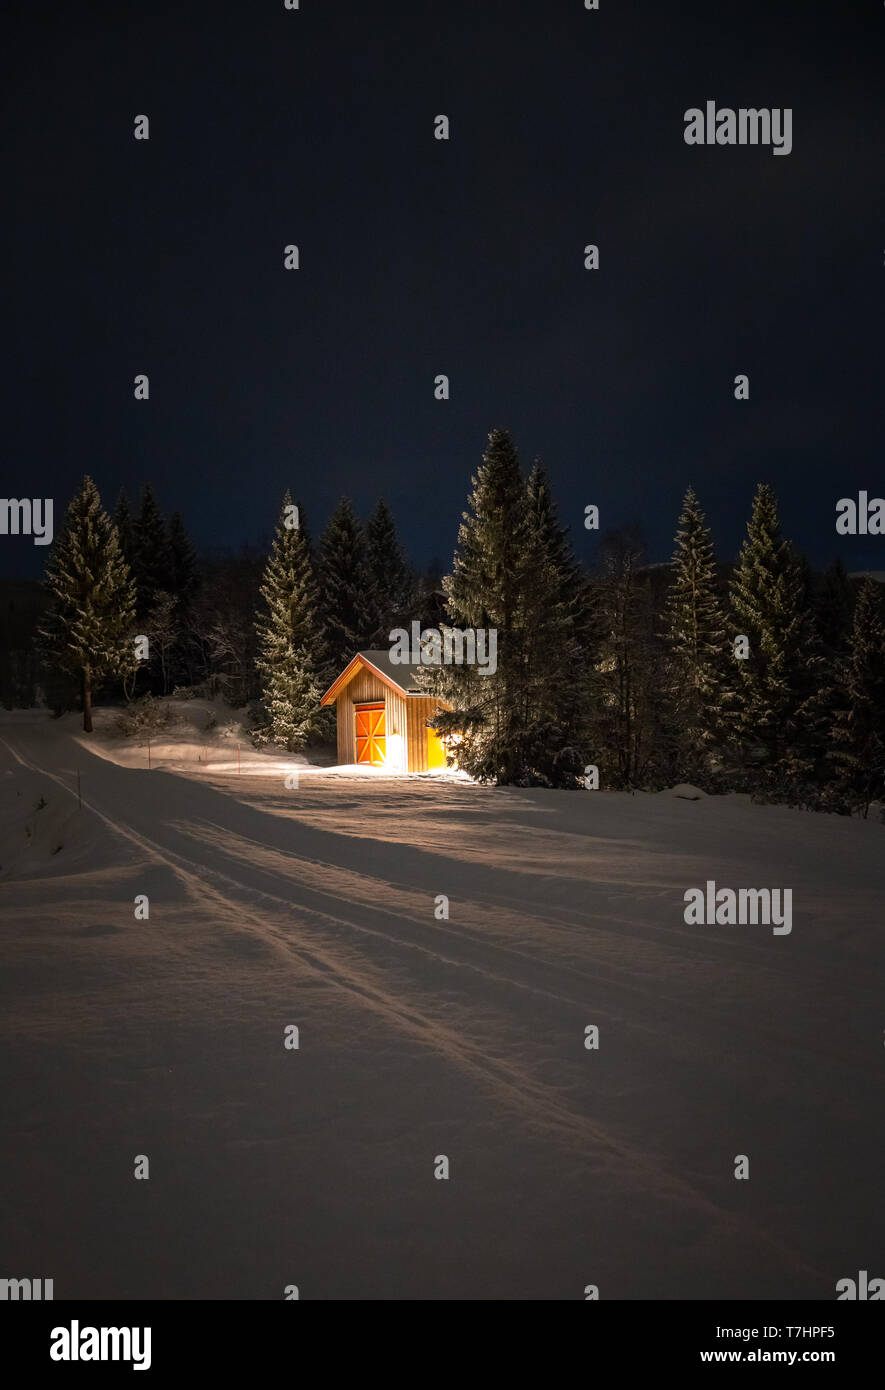 Small cabin in the winter forest, snowy road, night sky, dark light. Stock Photo